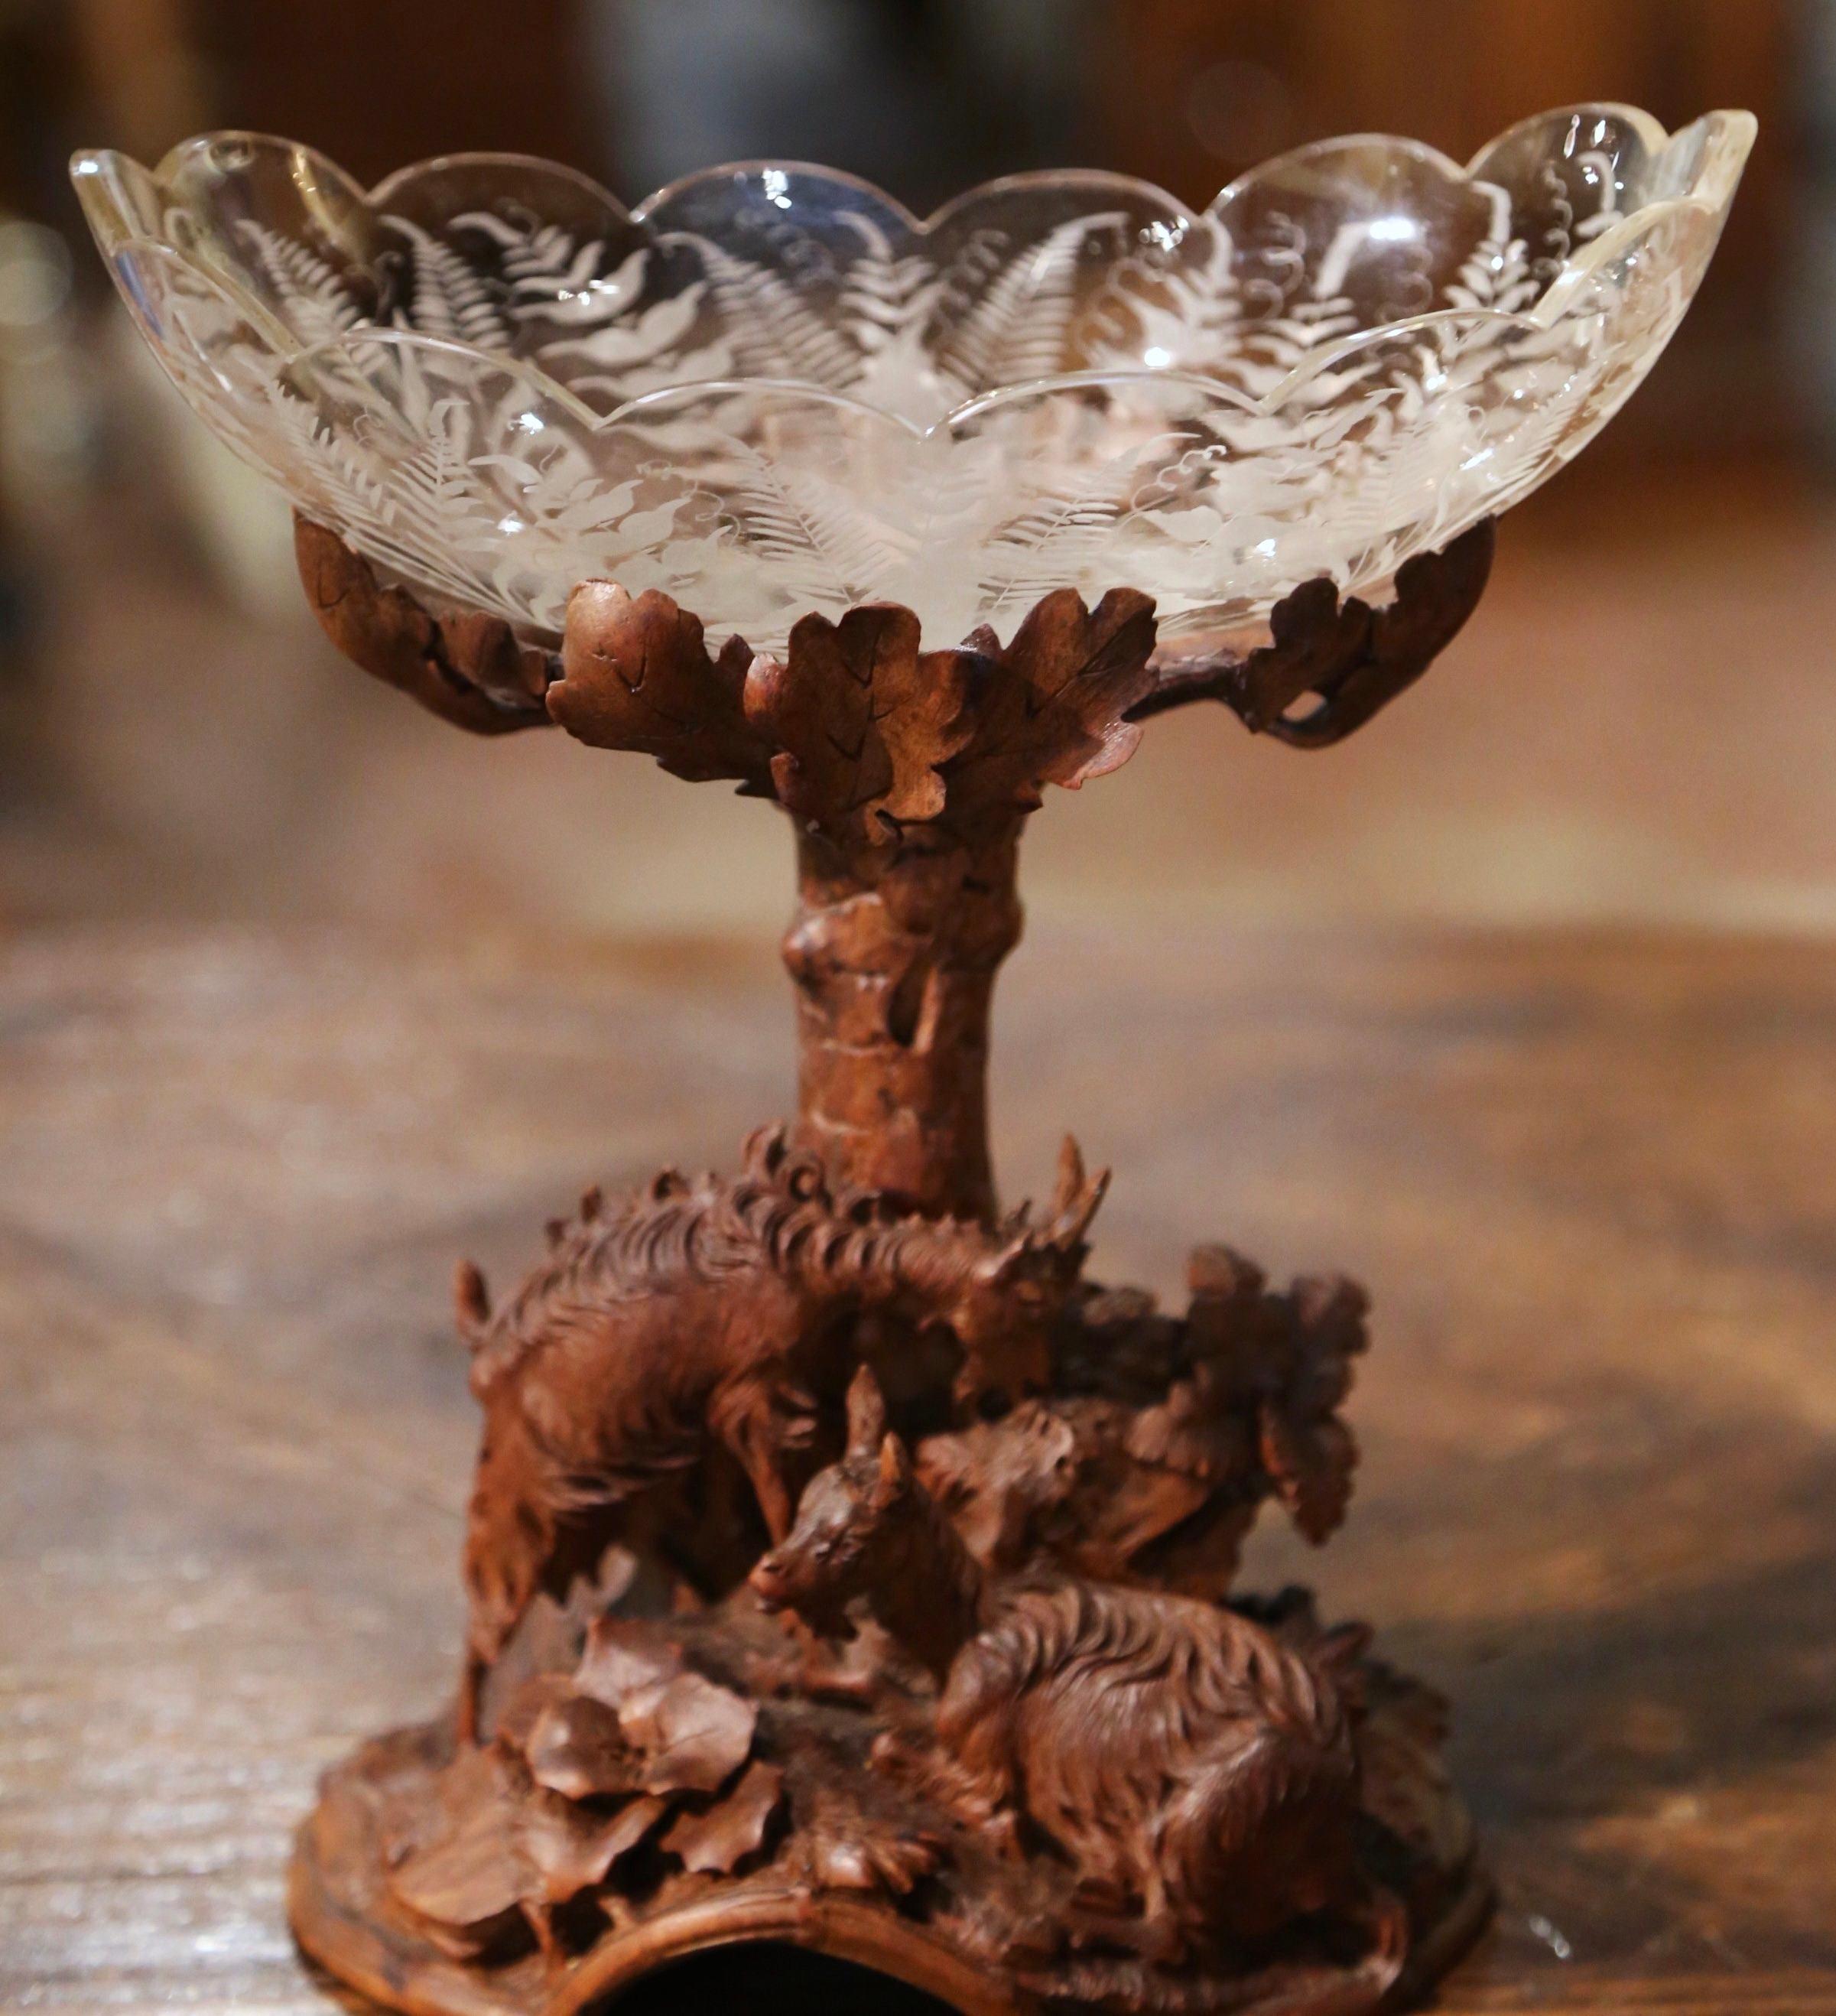 French 19th Century Black Forest Carved Walnut and Crystal Center Piece with Goat Decor For Sale